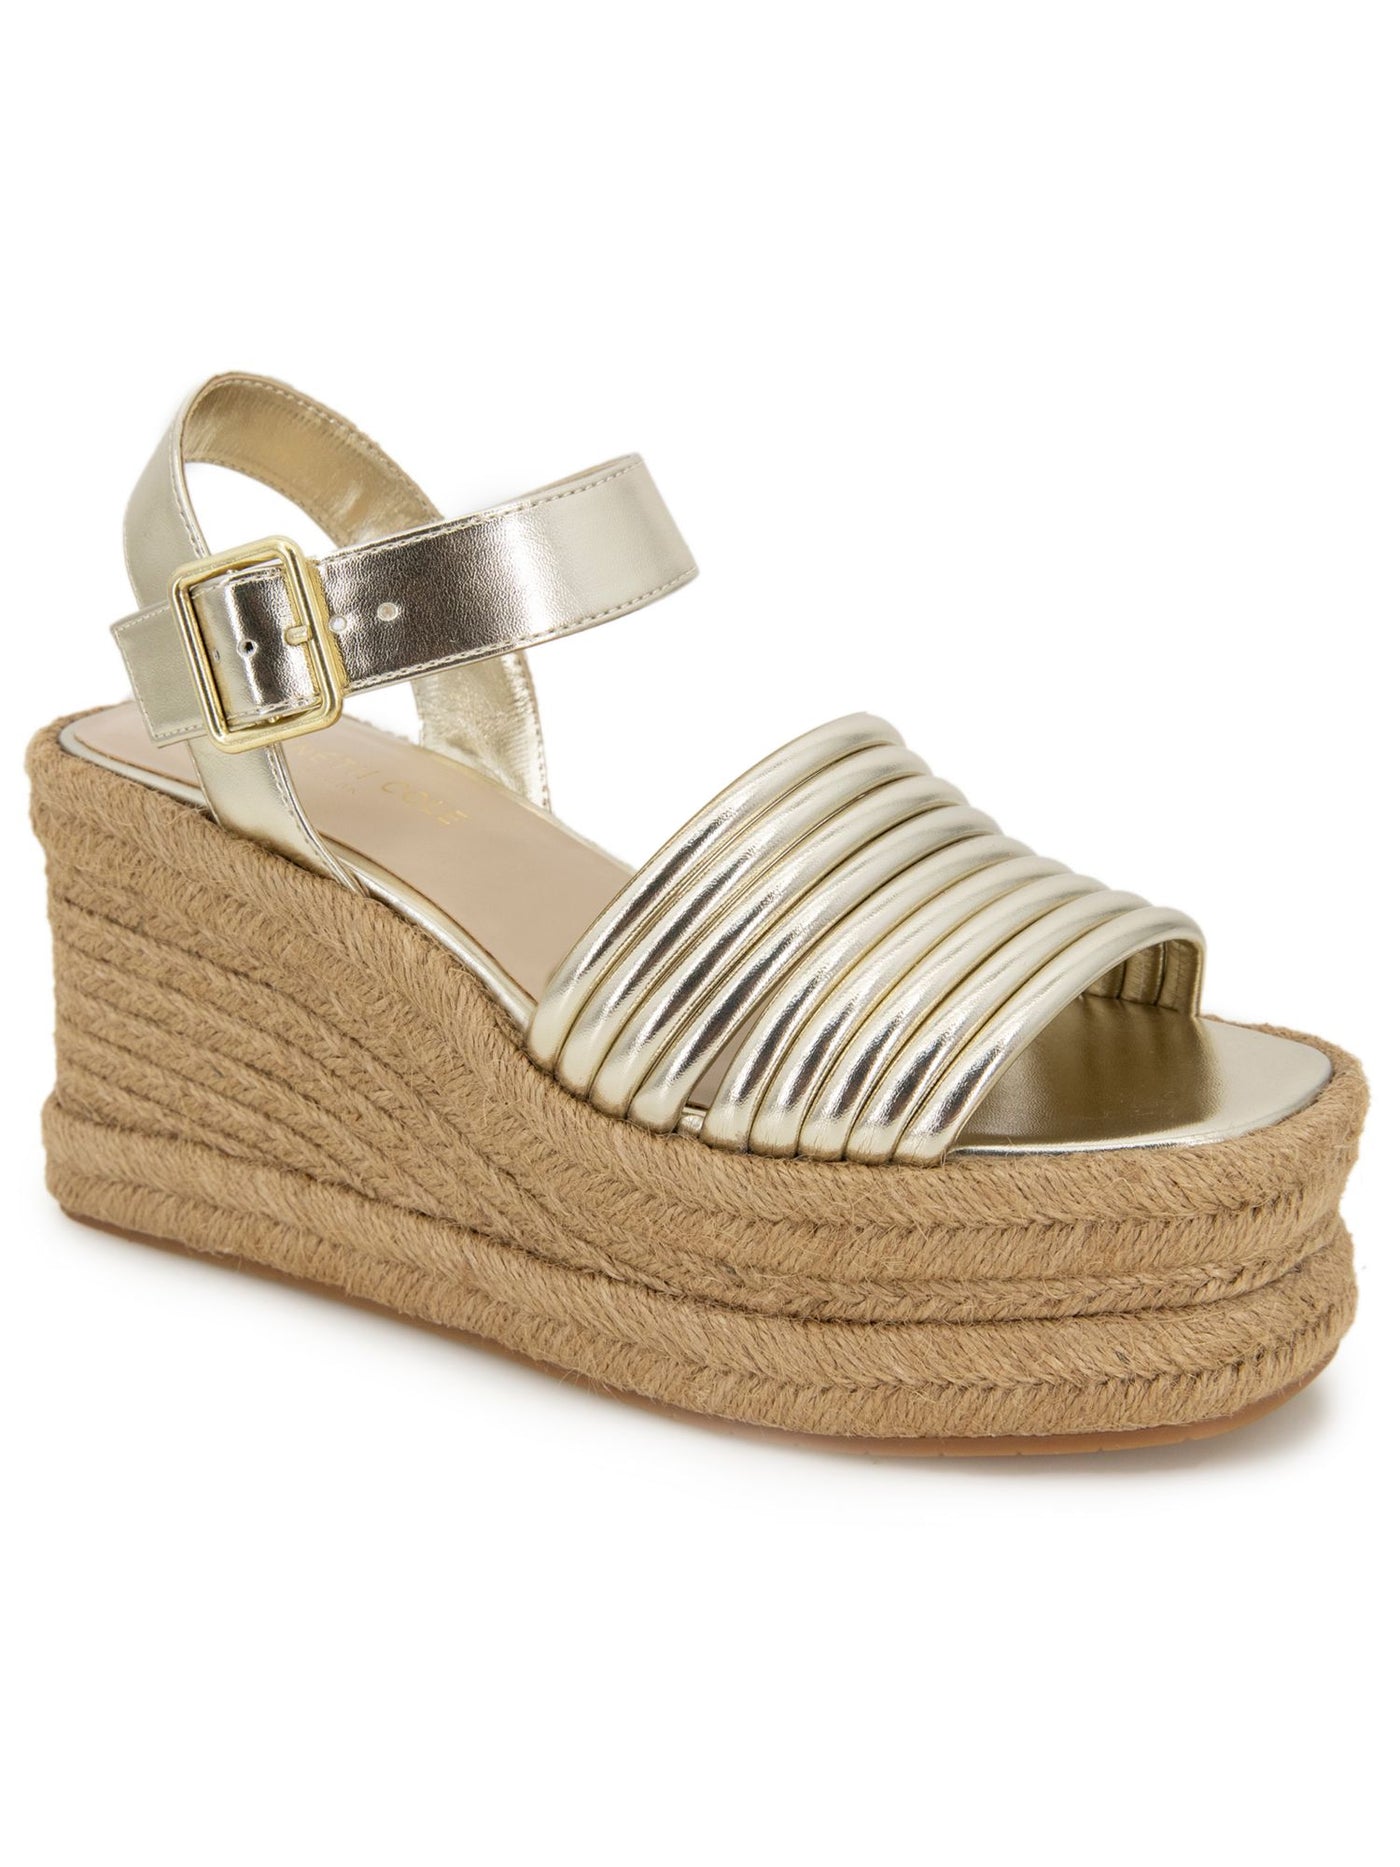 KENNETH COLE NEW YORK Womens Gold 2 Wedge Adjustable Ankle Strap Strappy Padded Shelby Open Toe Wedge Buckle Espadrille Shoes 9.5 M